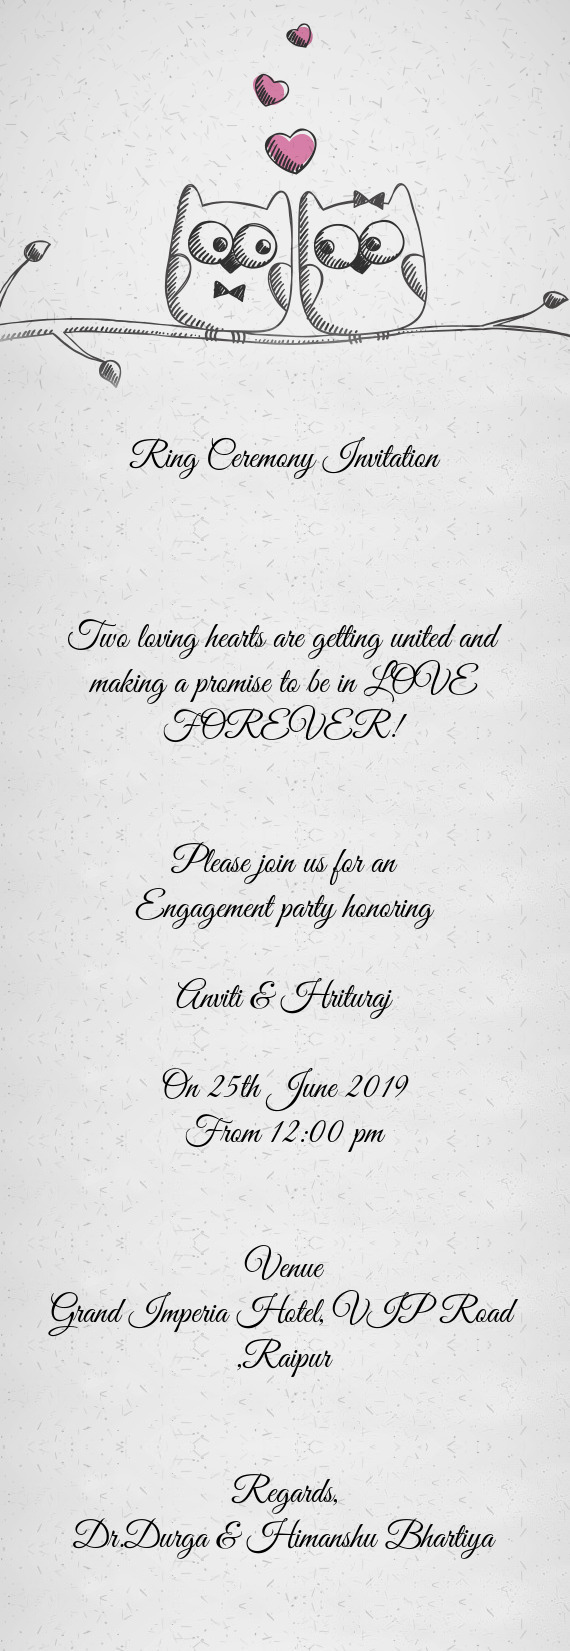 Ring Ceremony Invitation
 
 
 
 Two loving hearts are getting united and making a promise to be in L